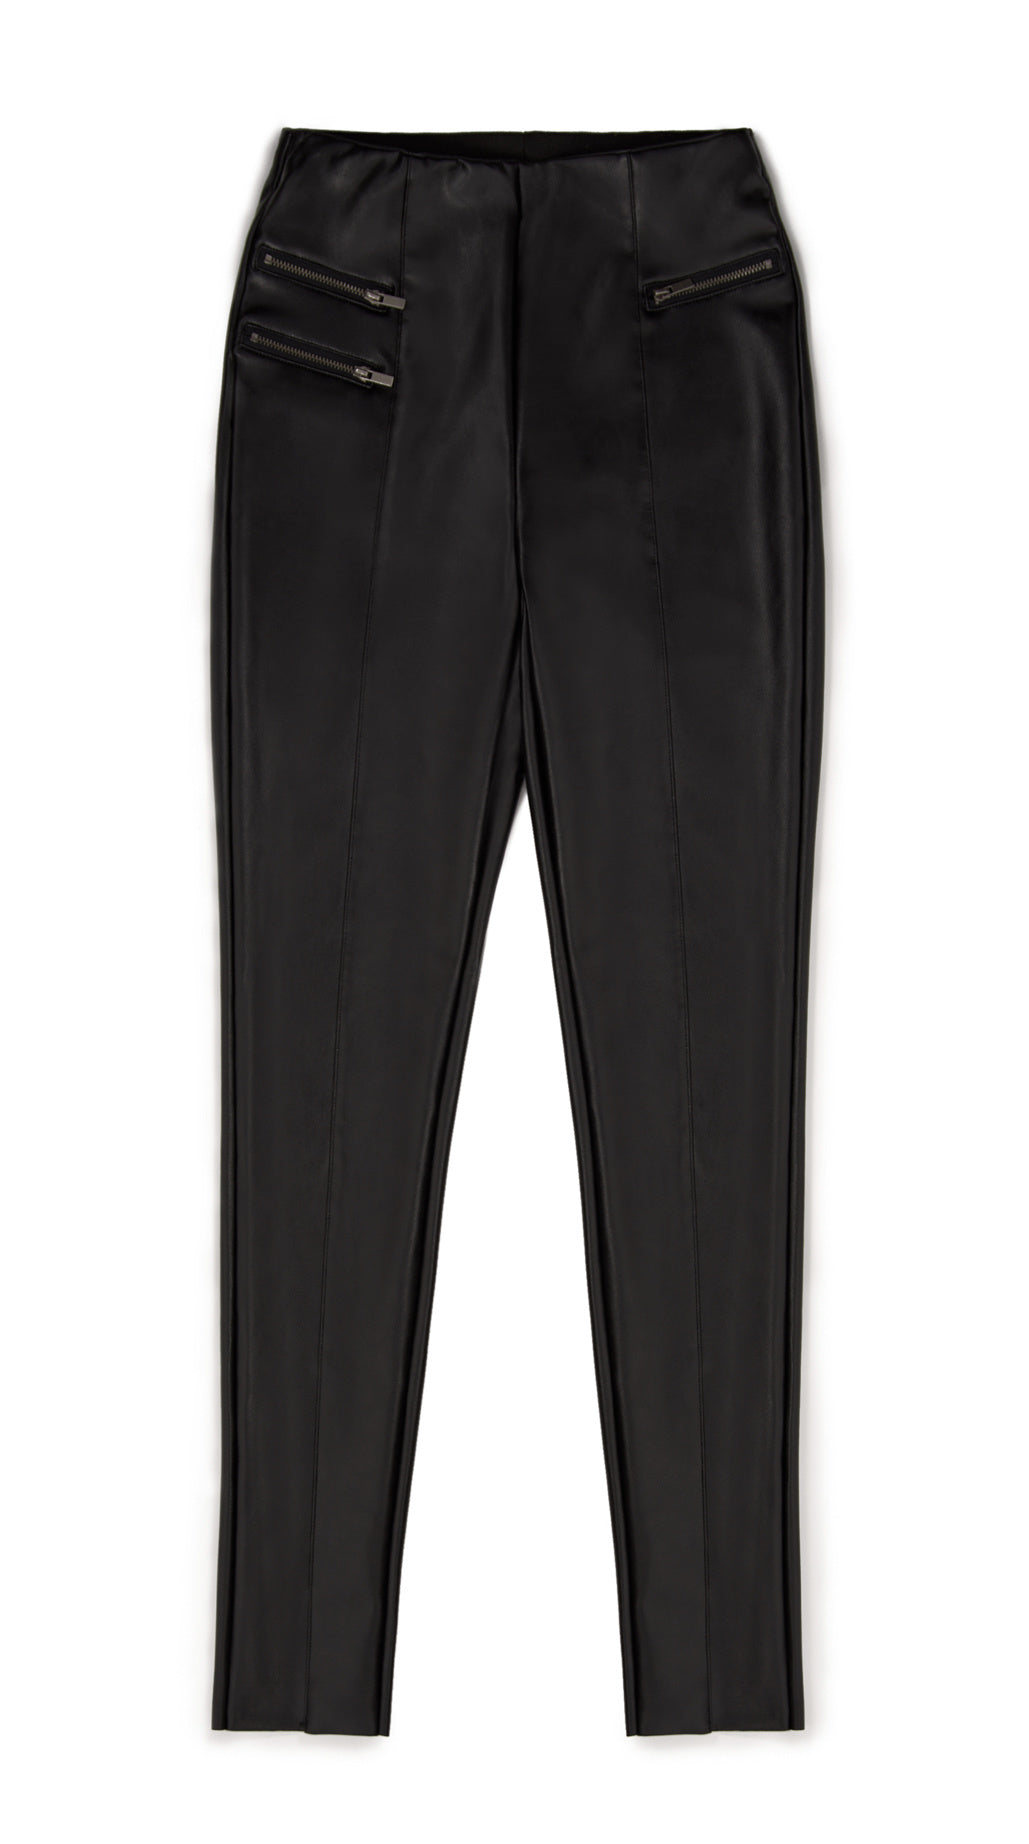 Ysabel Mora 70163 Faux Leather Leggings - Black high rise leather look fleece lined thermal leggings with centre seam down the front of the legs, 2 zips on one side and 1 on the other and darts at the back to ensure a snug fit.